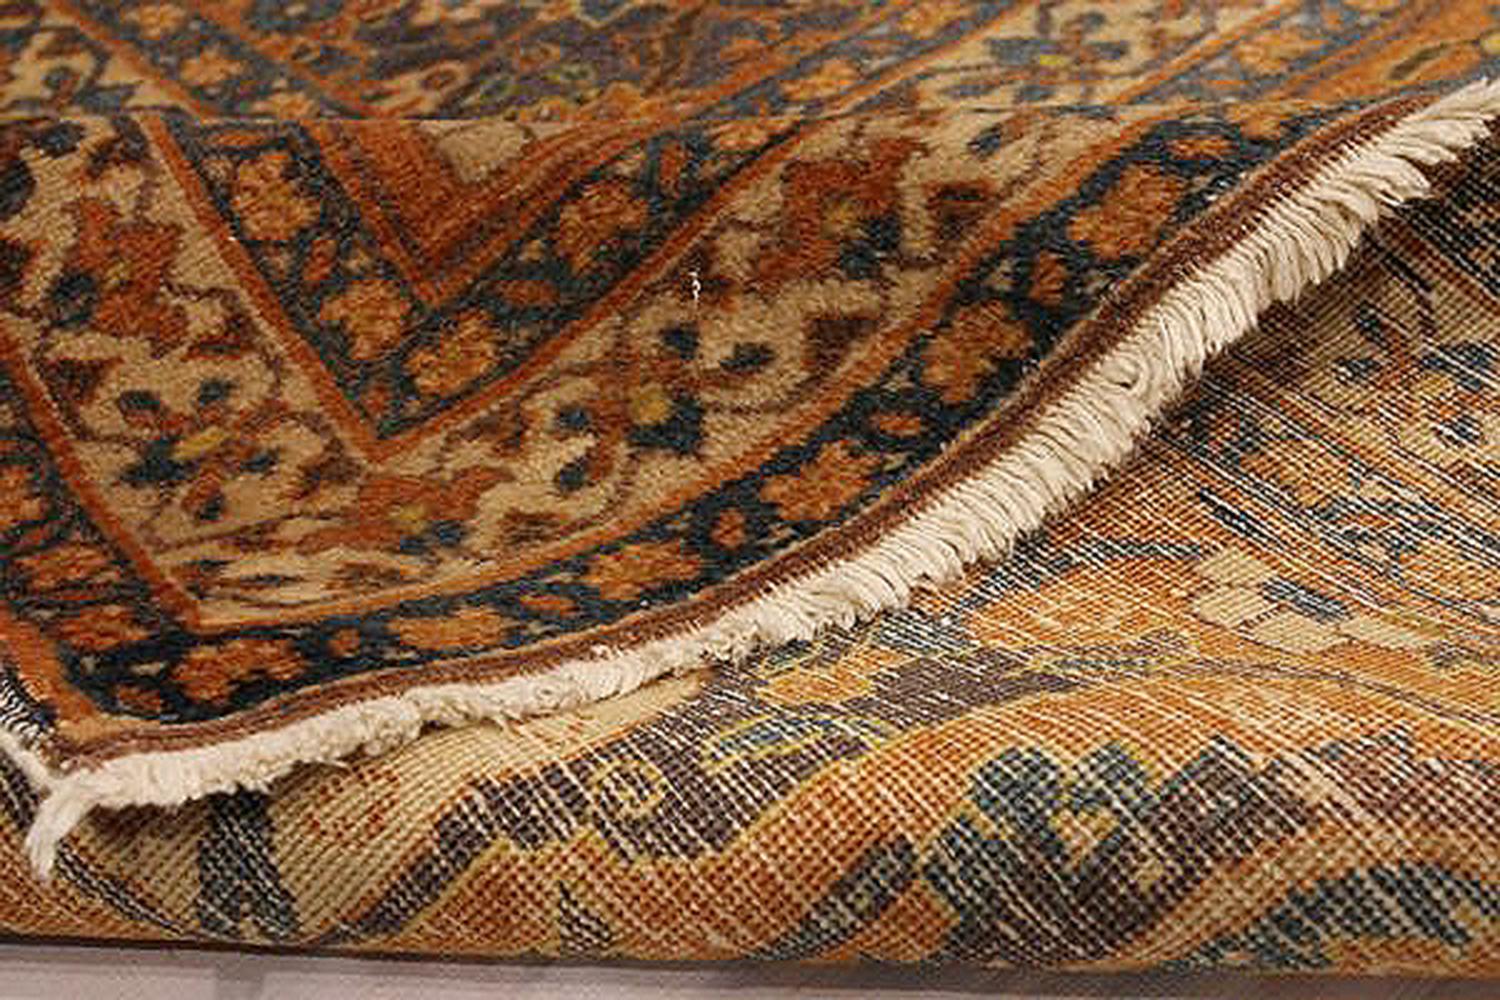 Islamic 1910 Antique Persian Tabriz Rug with Beige & Rust Flower Details on Brown Field For Sale